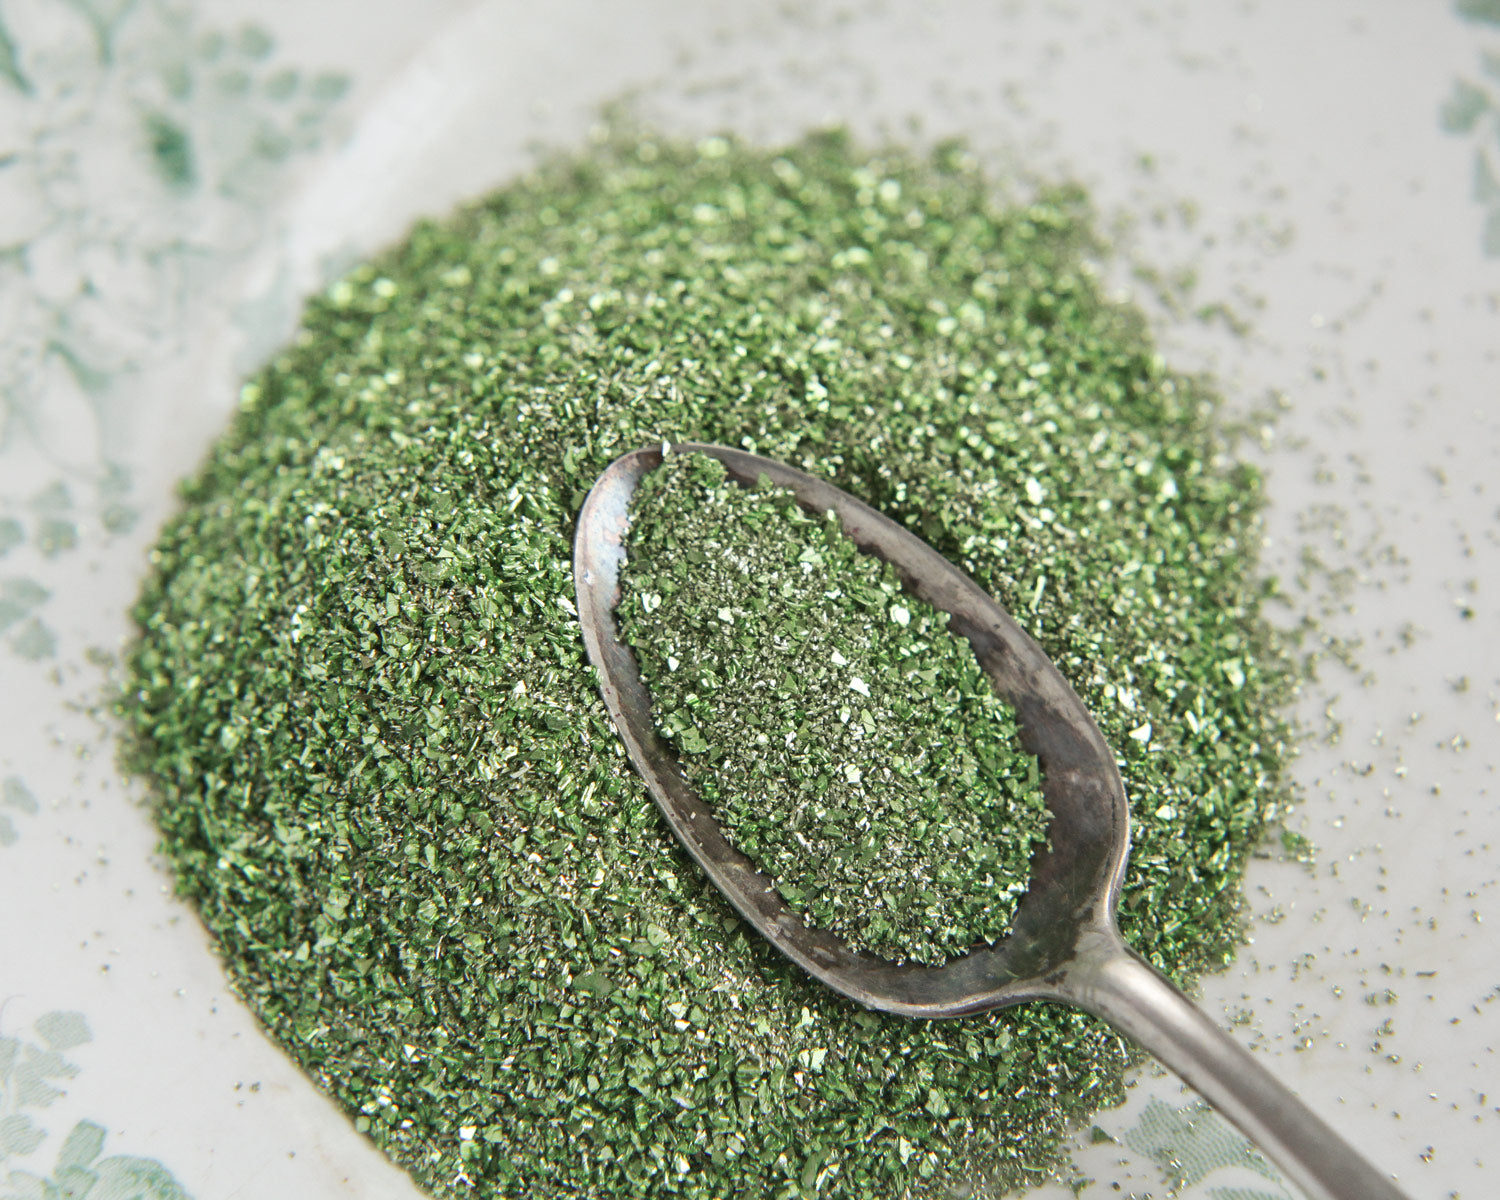 Real German GLASS GLITTER Fine Spring Green 1 Ounce 80 Grit 